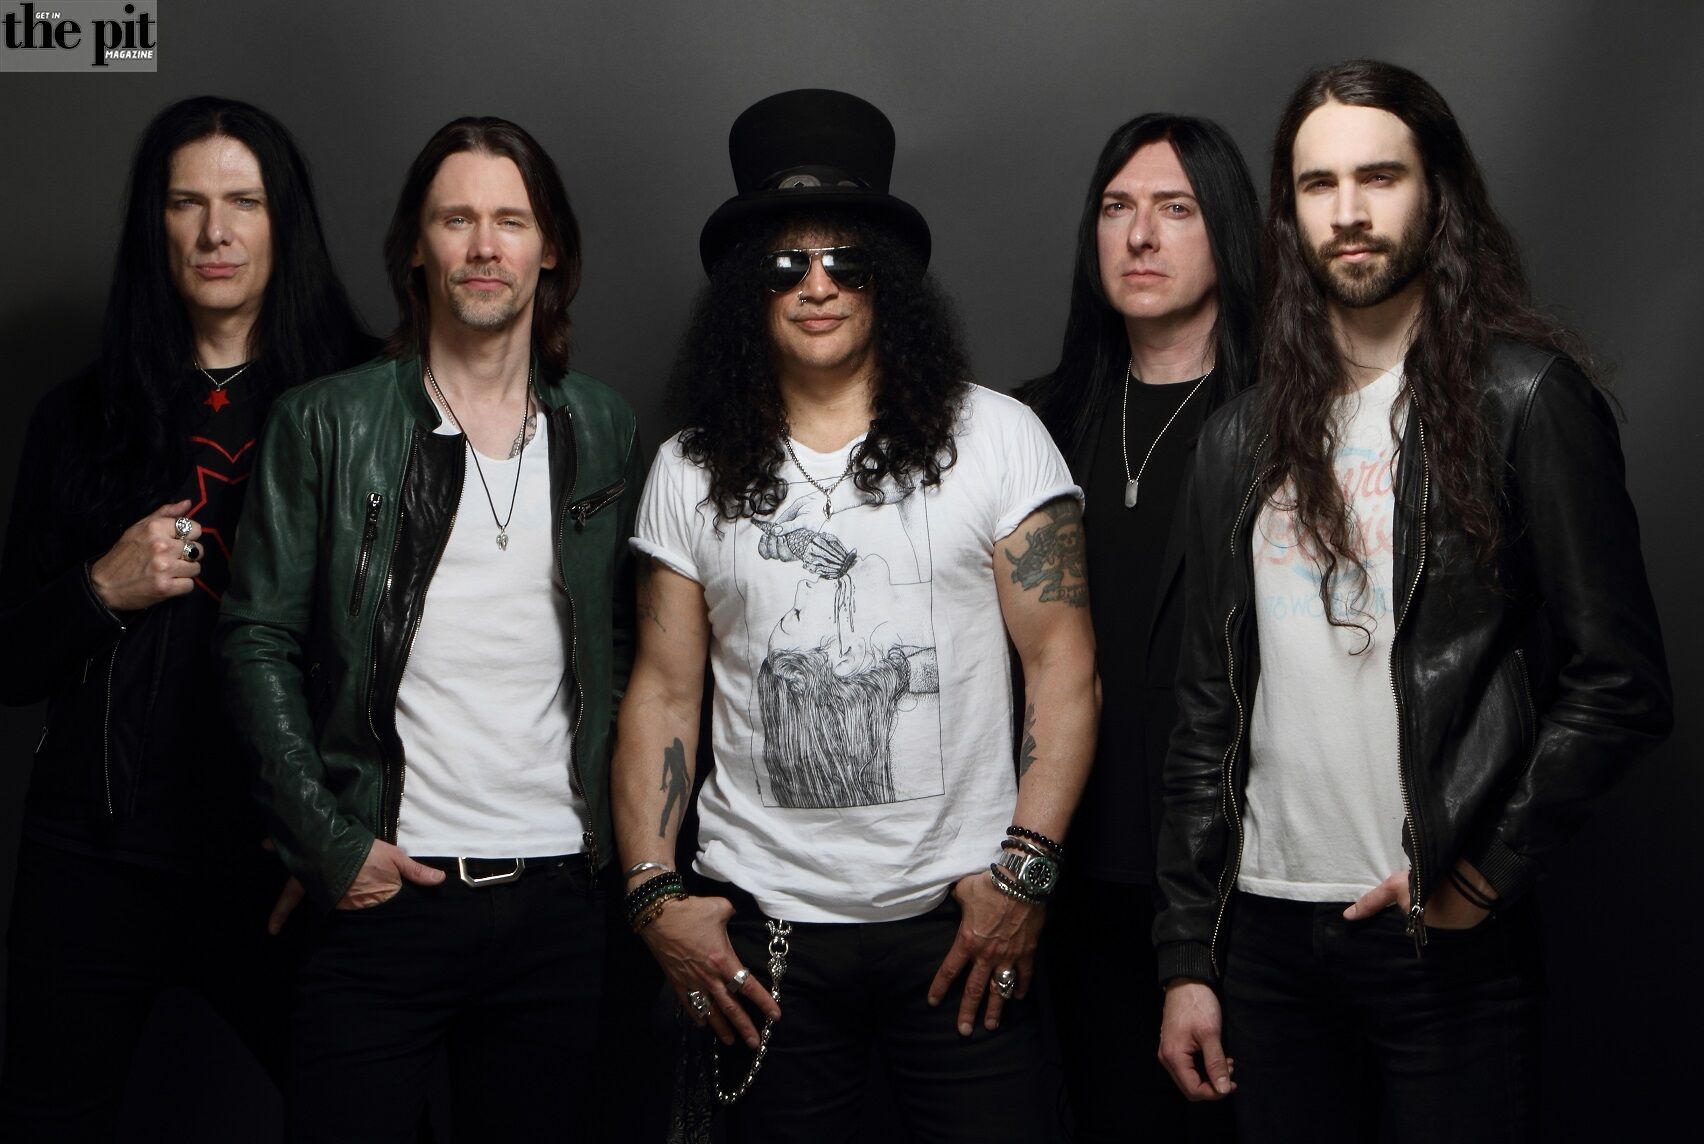 Five men from a rock band pose for a photo, wearing leather jackets and dark clothes, with Slash sporting a top hat.